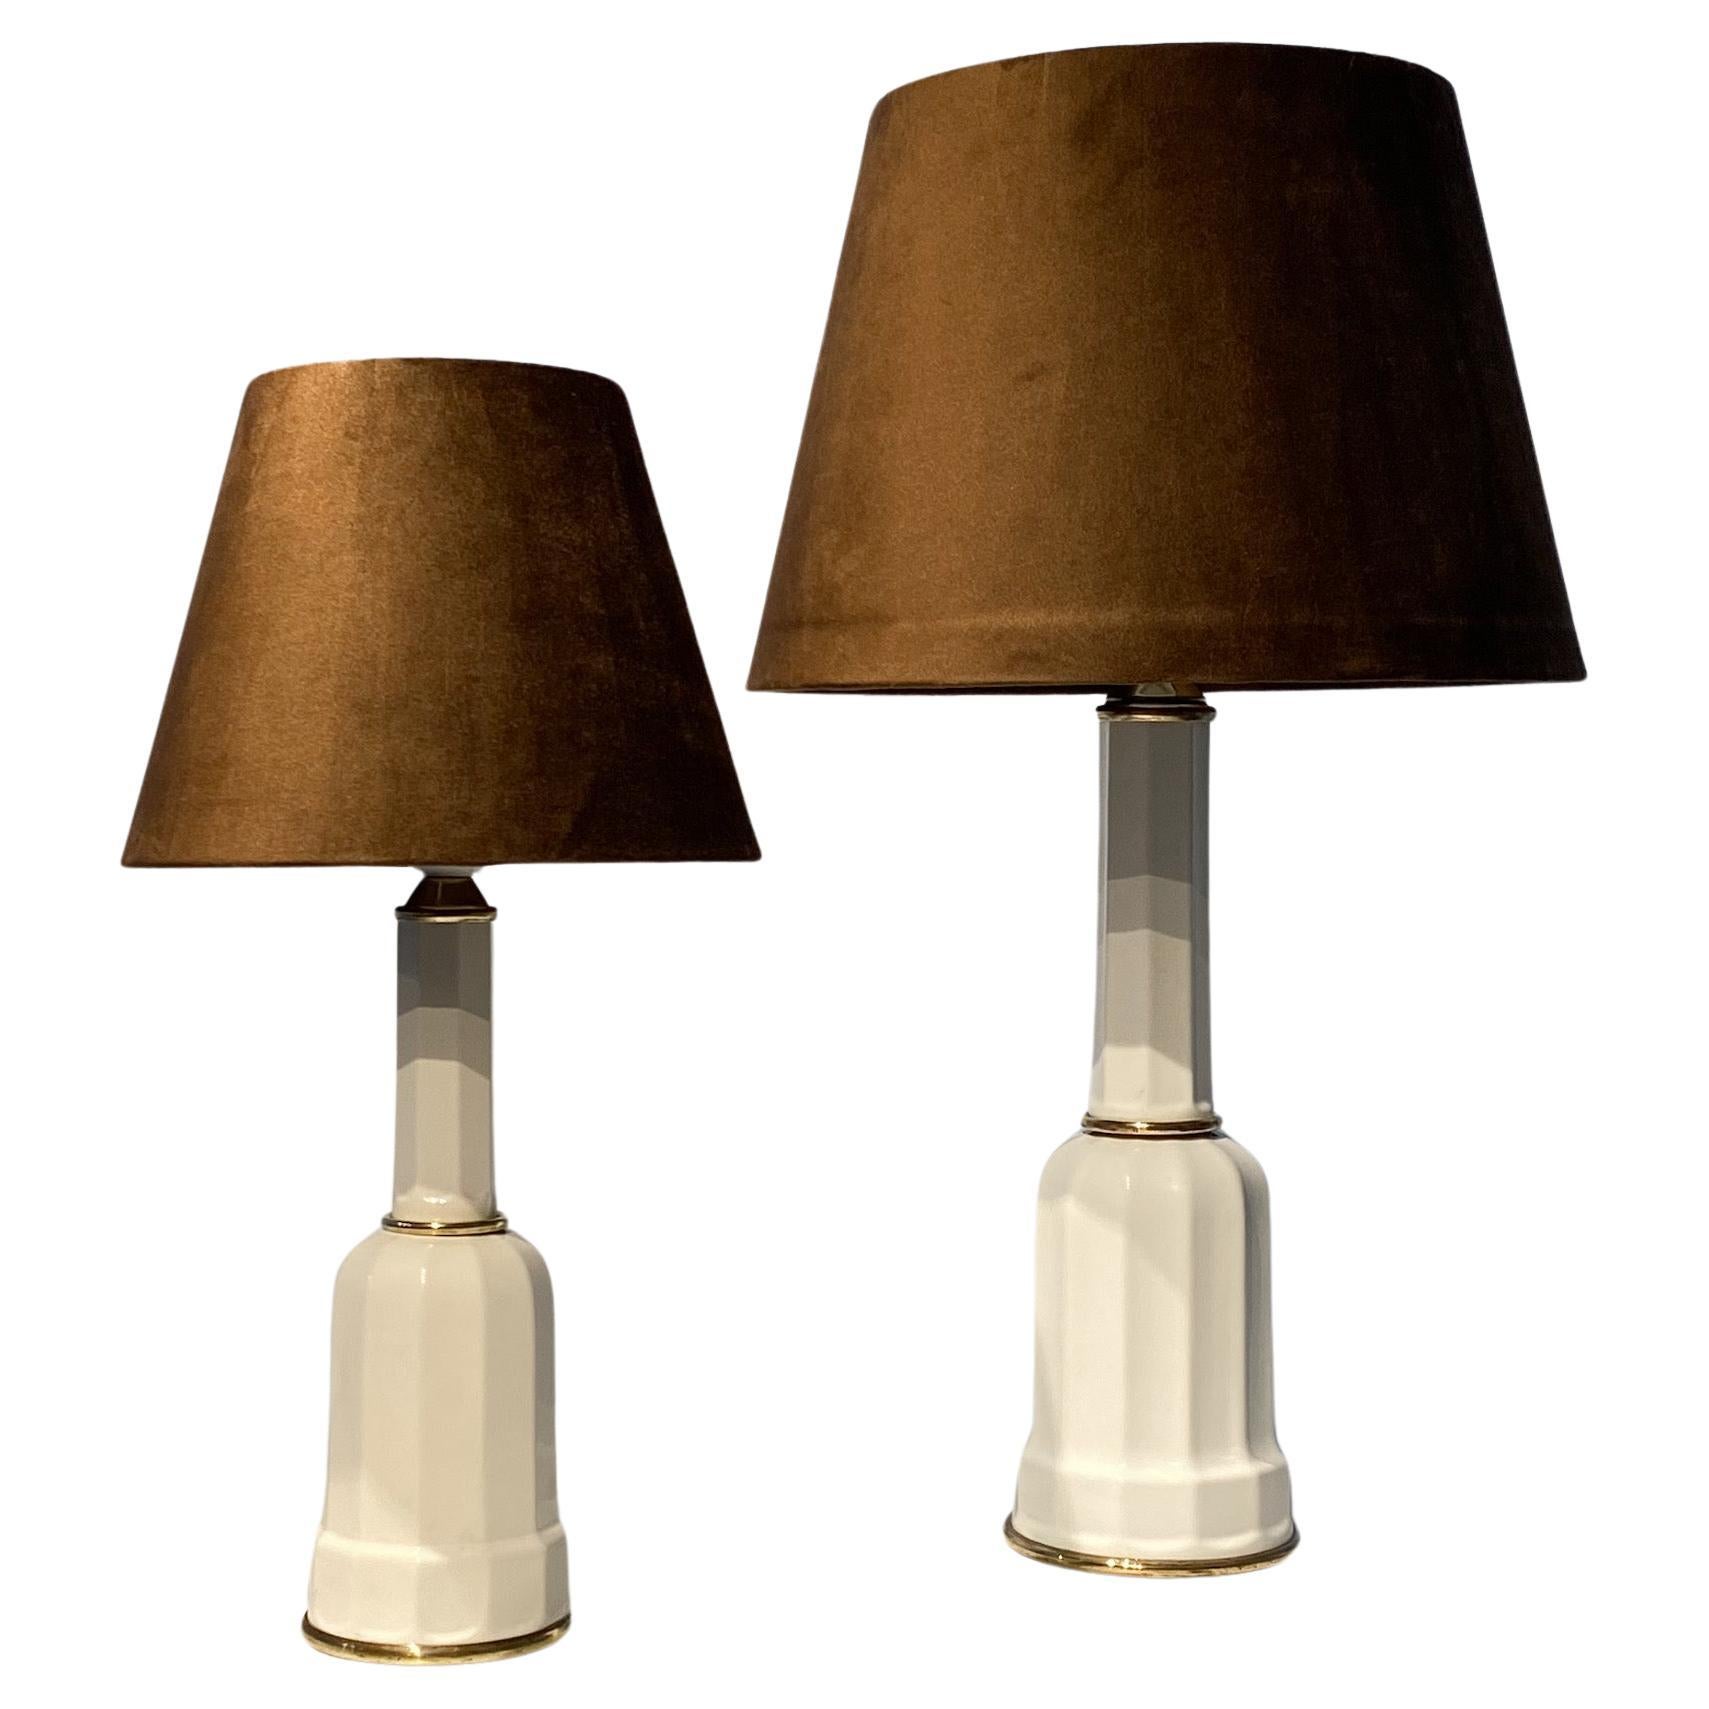 Vintage Danish Heiberg table lamps, porcelain and brass For Sale